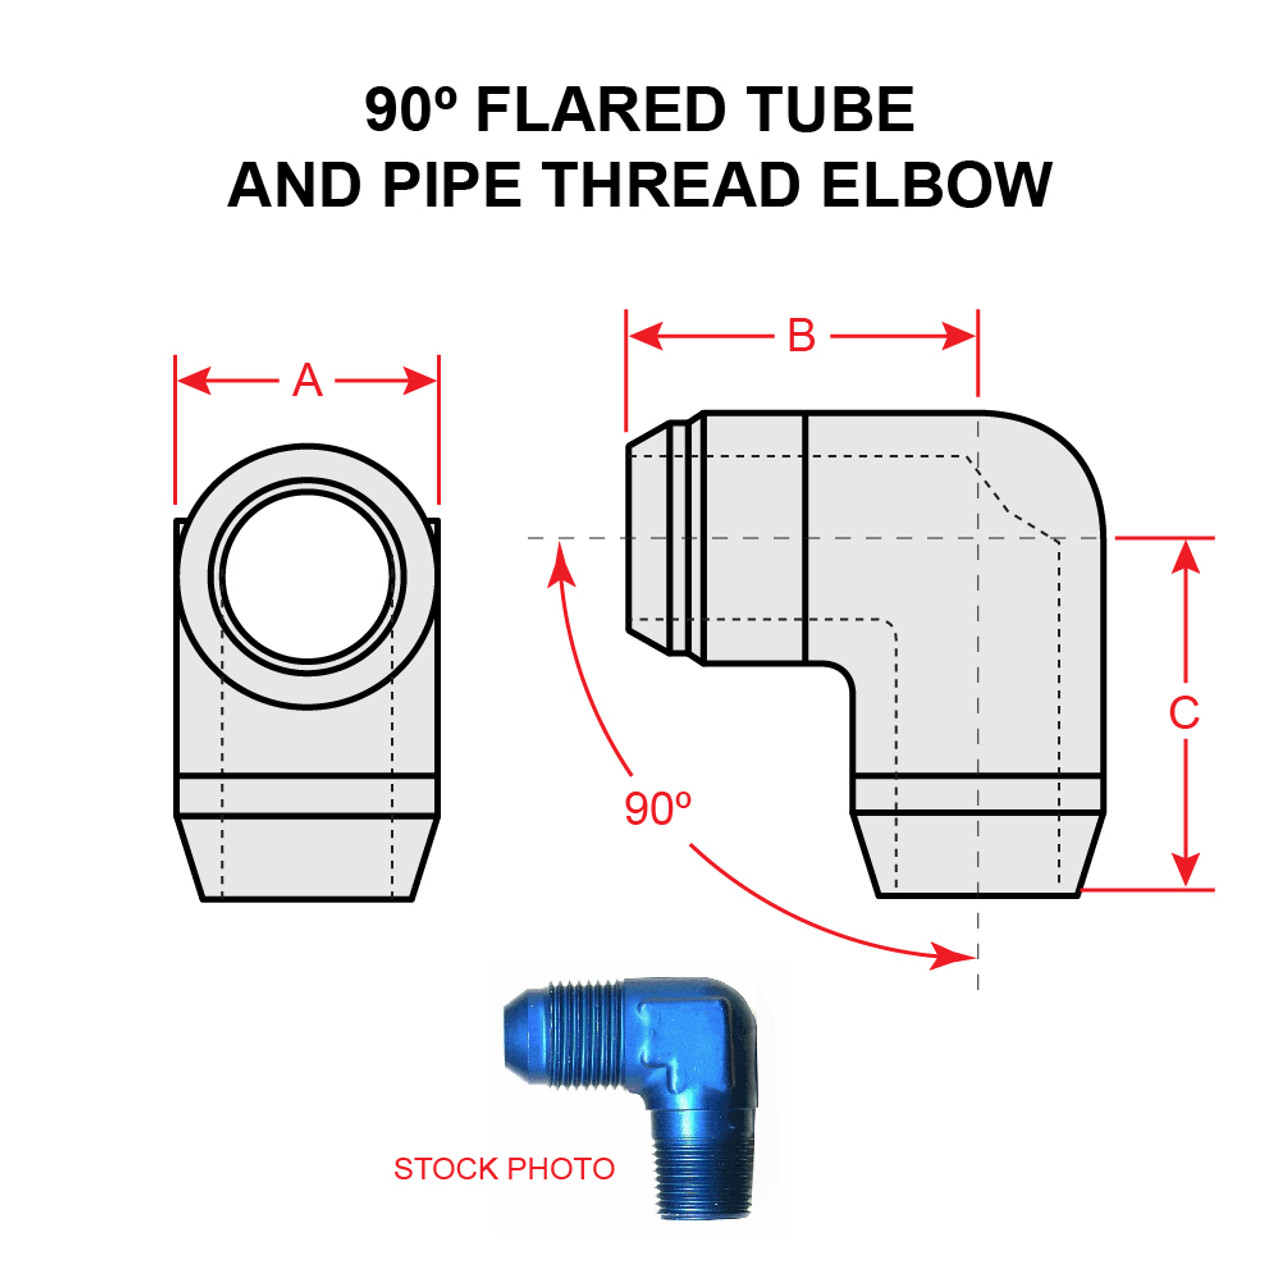 MS20822-2D     90 DEGREE FLARED TUBE AND PIPE THREAD ELBOW